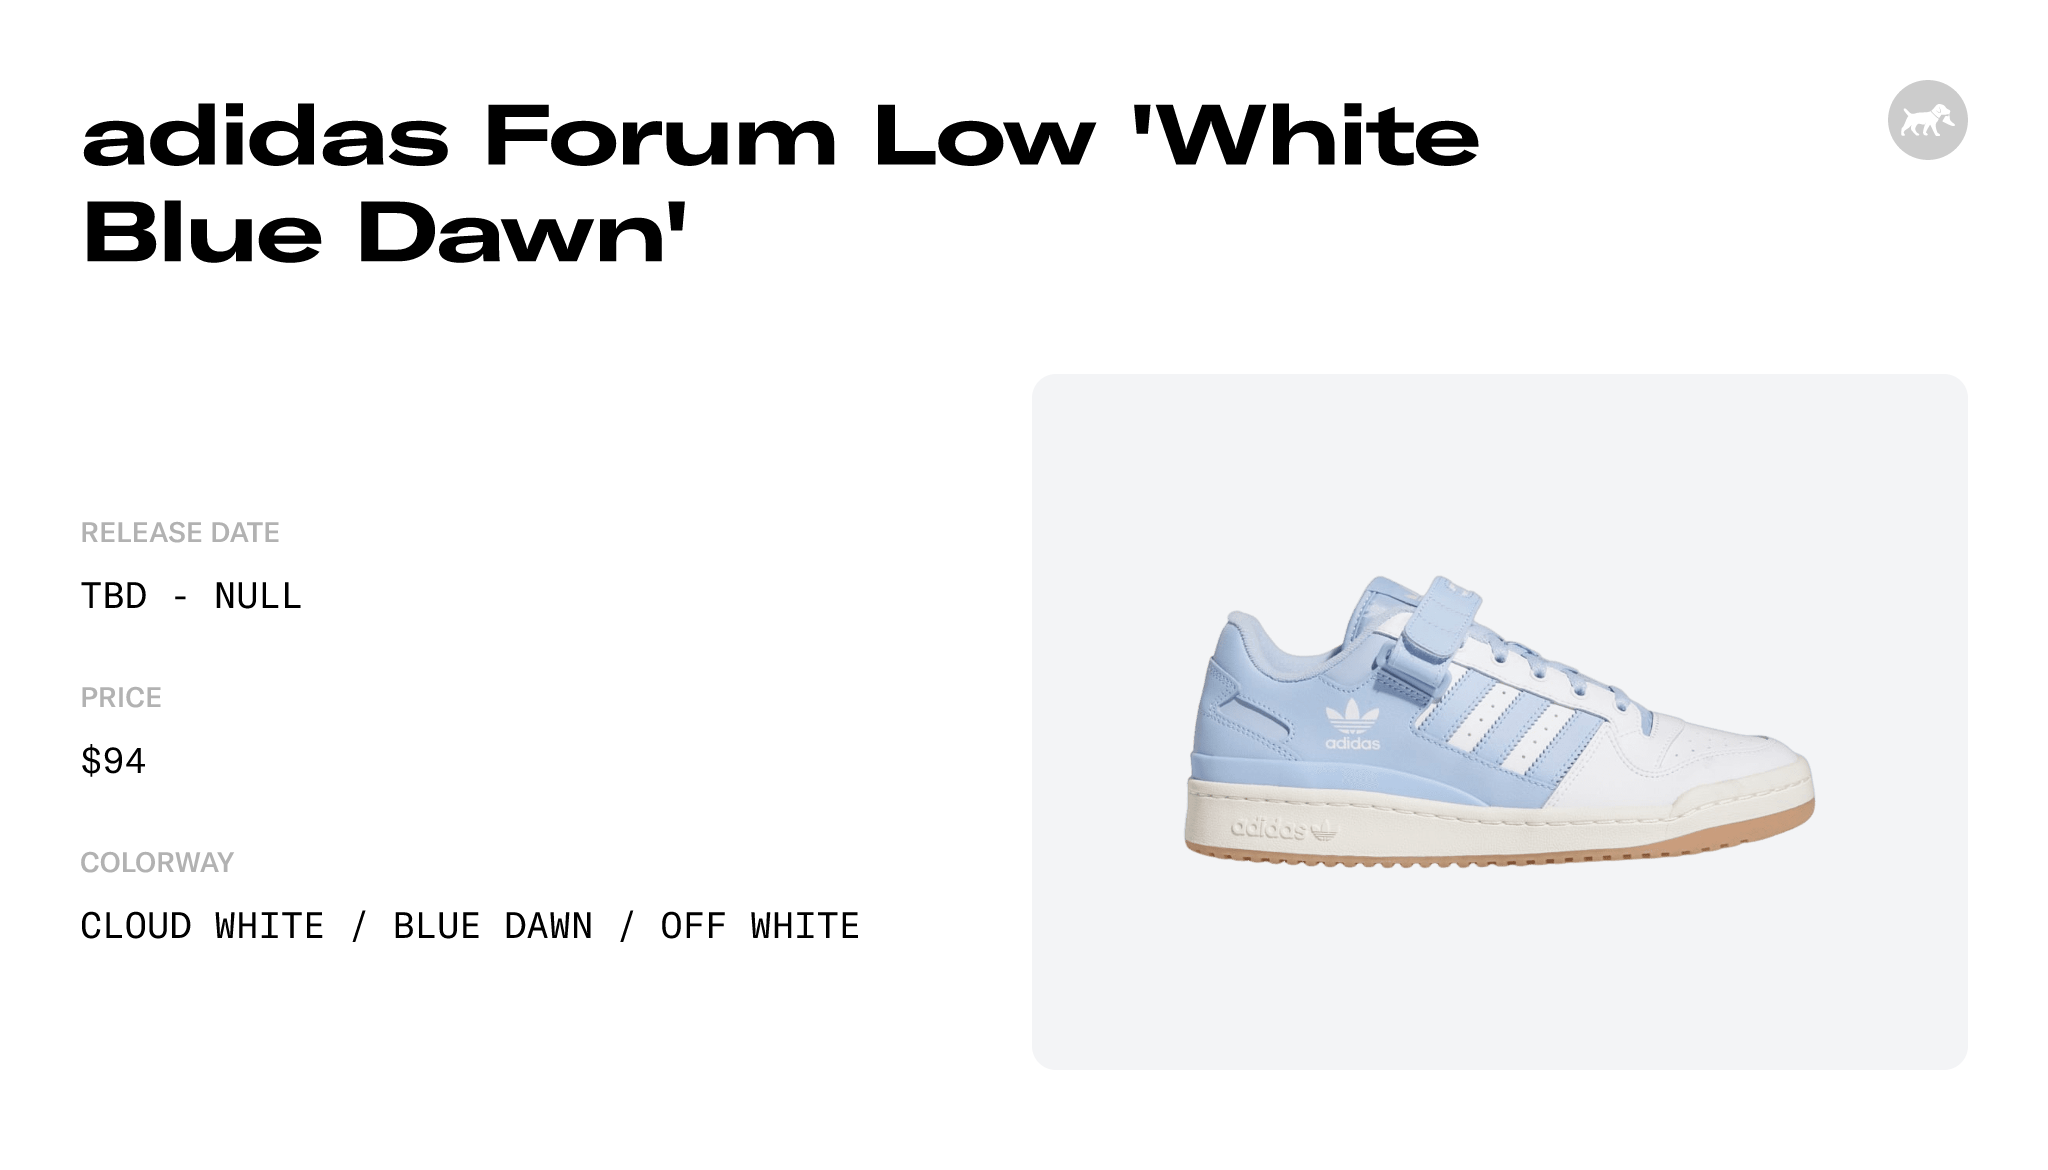 adidas Forum Low 'White Blue Dawn' - GY0003 Raffles and Release Date